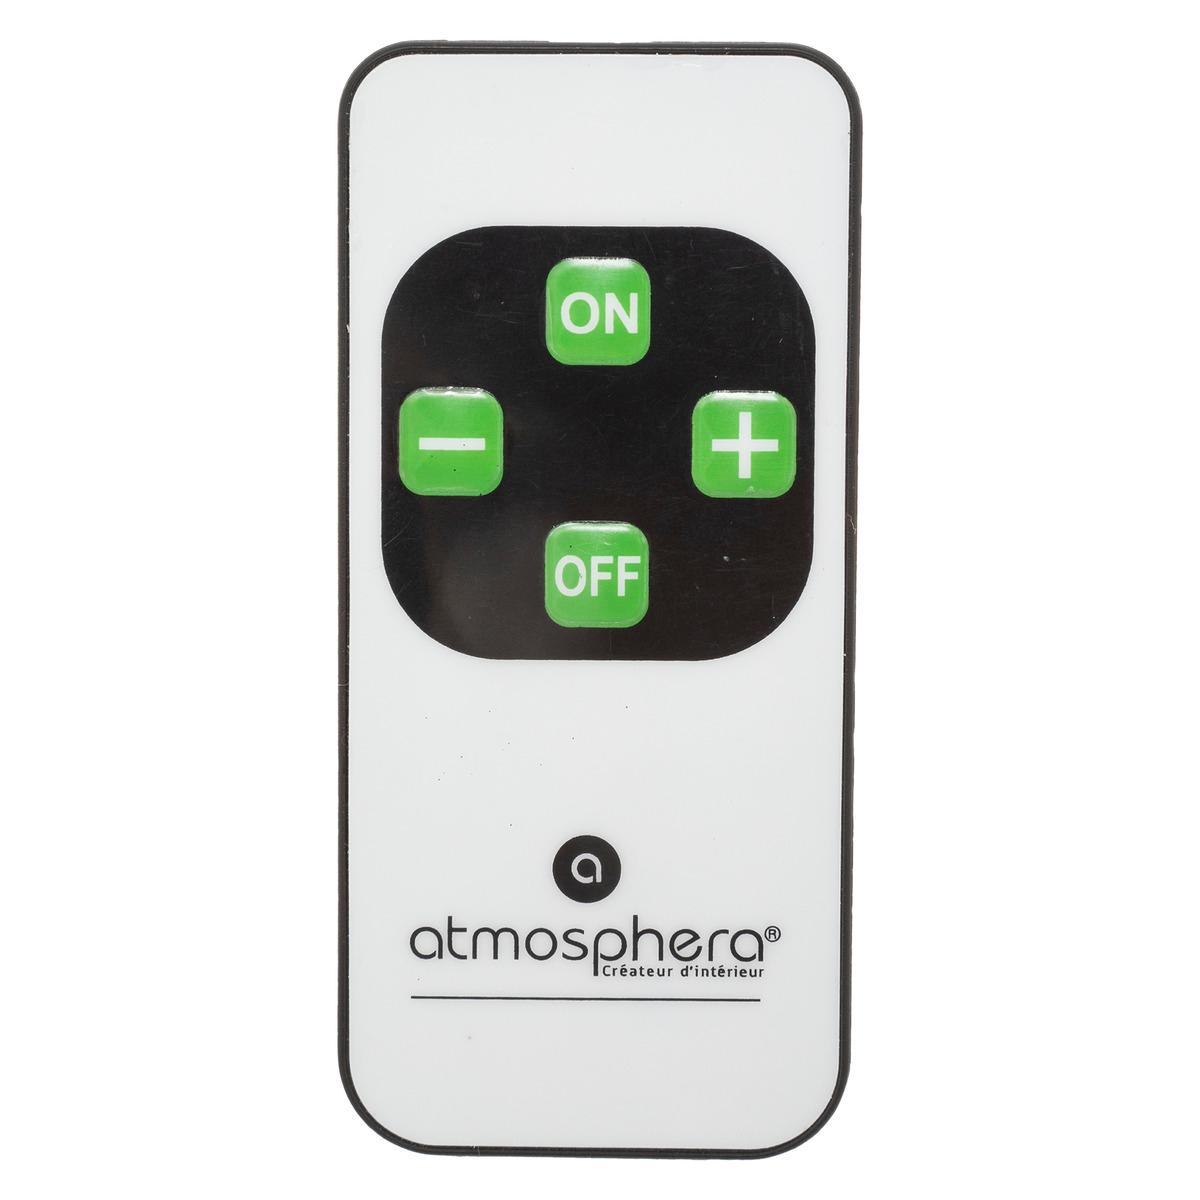 Compare prices for ATMOSPHERA CREATEUR D'INTERIEUR across all